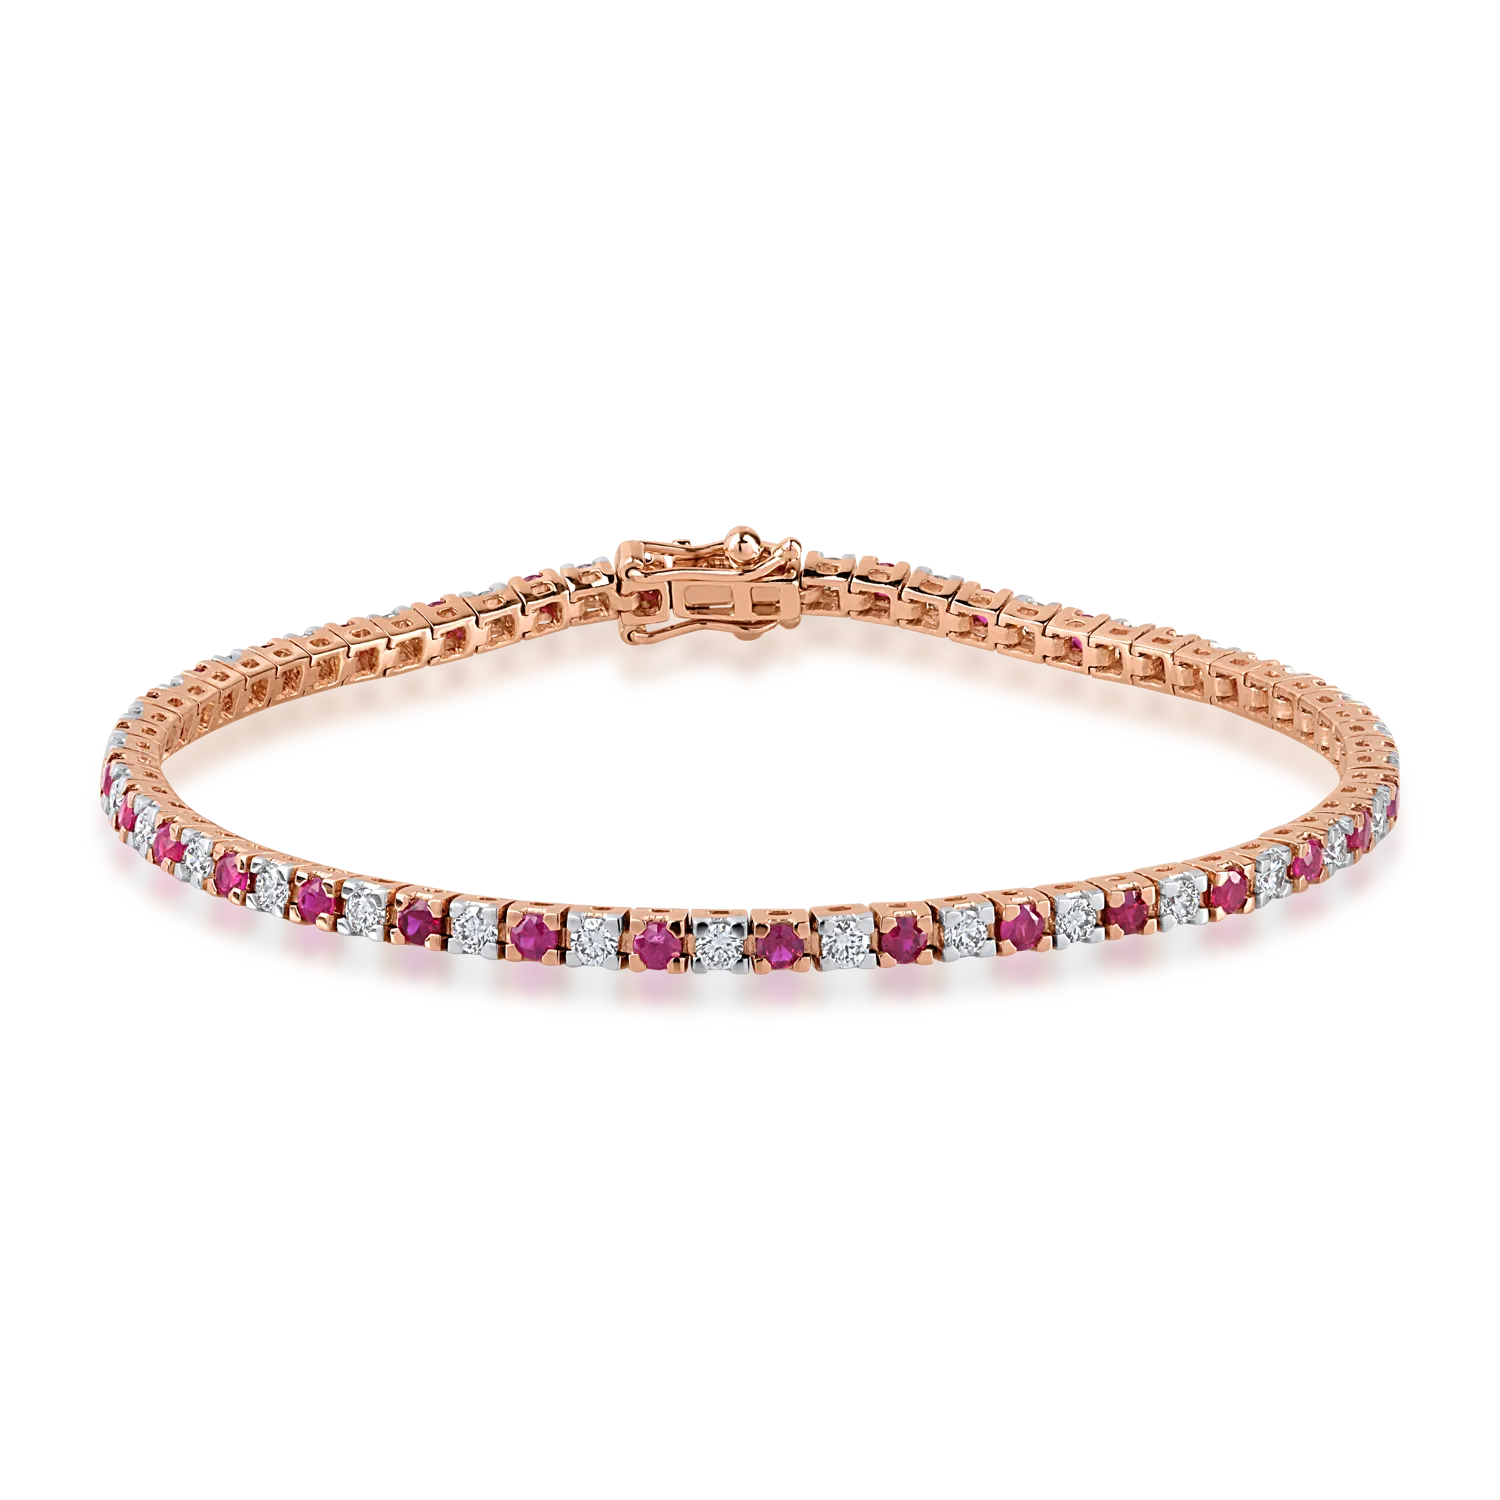 Rose gold tennis bracelet with 1.68ct rubies and 1.34ct diamonds